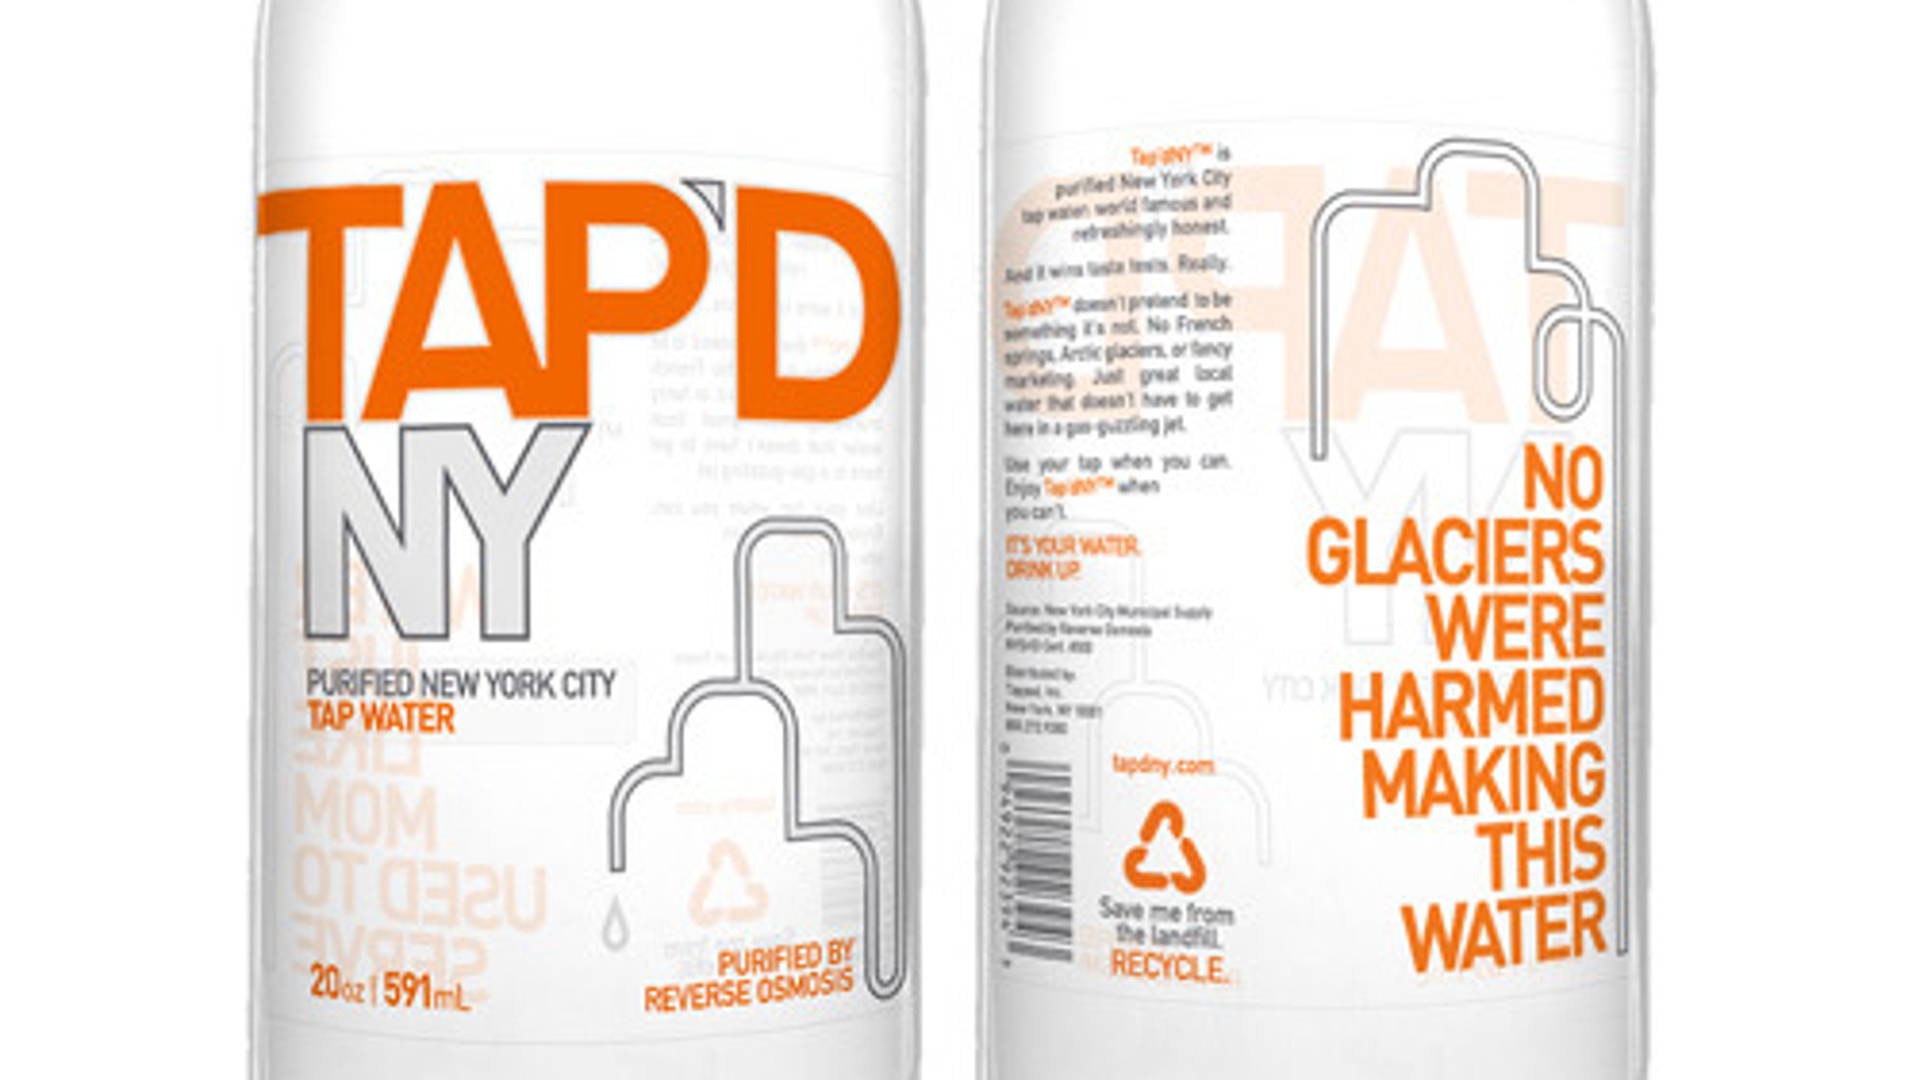 Featured image for Tap'd NY - New York "Bottled" Water